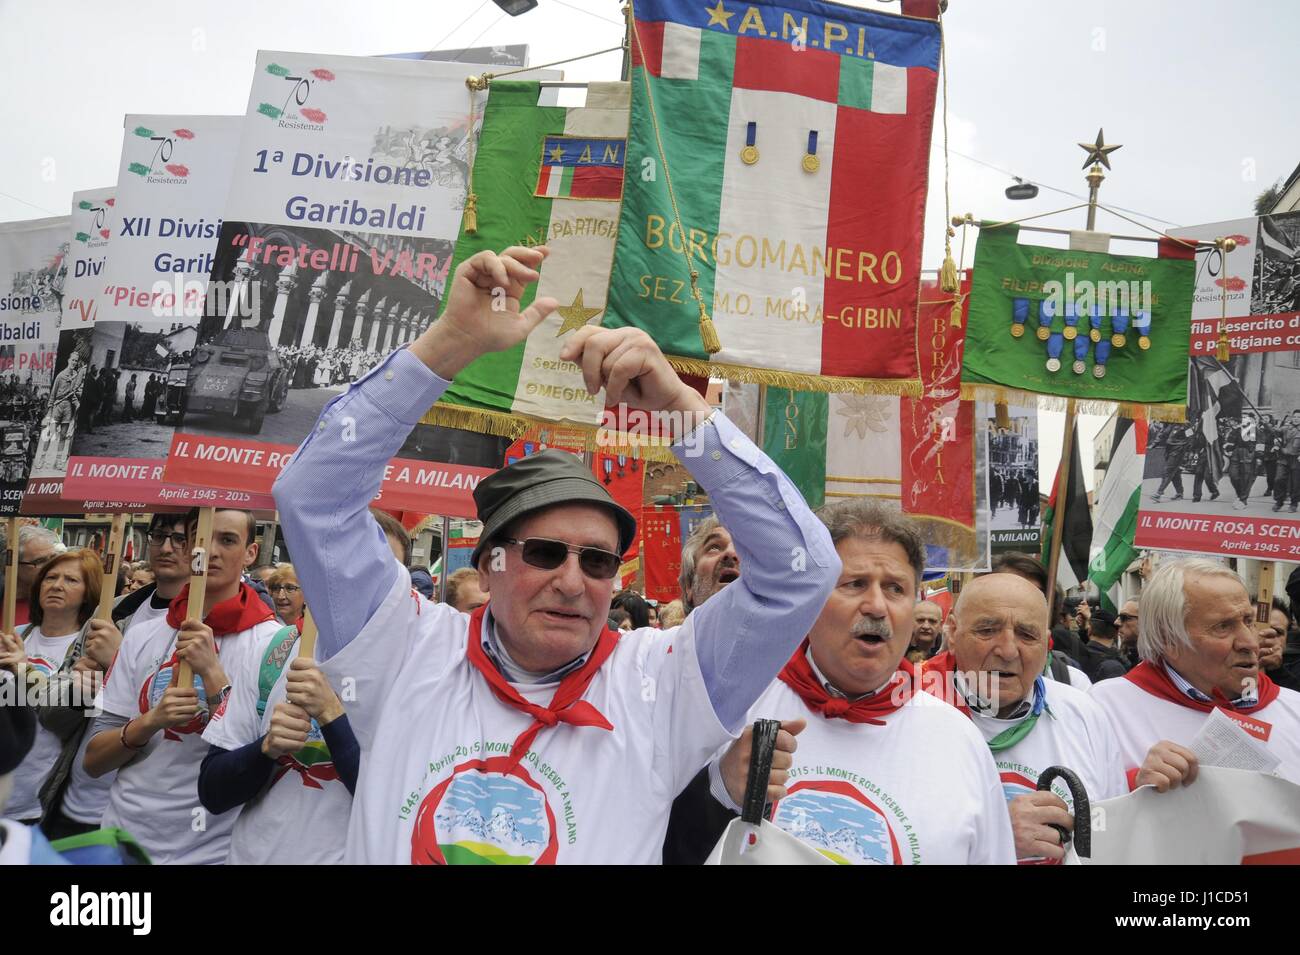 The 25th of April is celebrated annually throughout Italy with feasts and demonstrations to remember the liberation from Nazi-fascism. Stock Photo